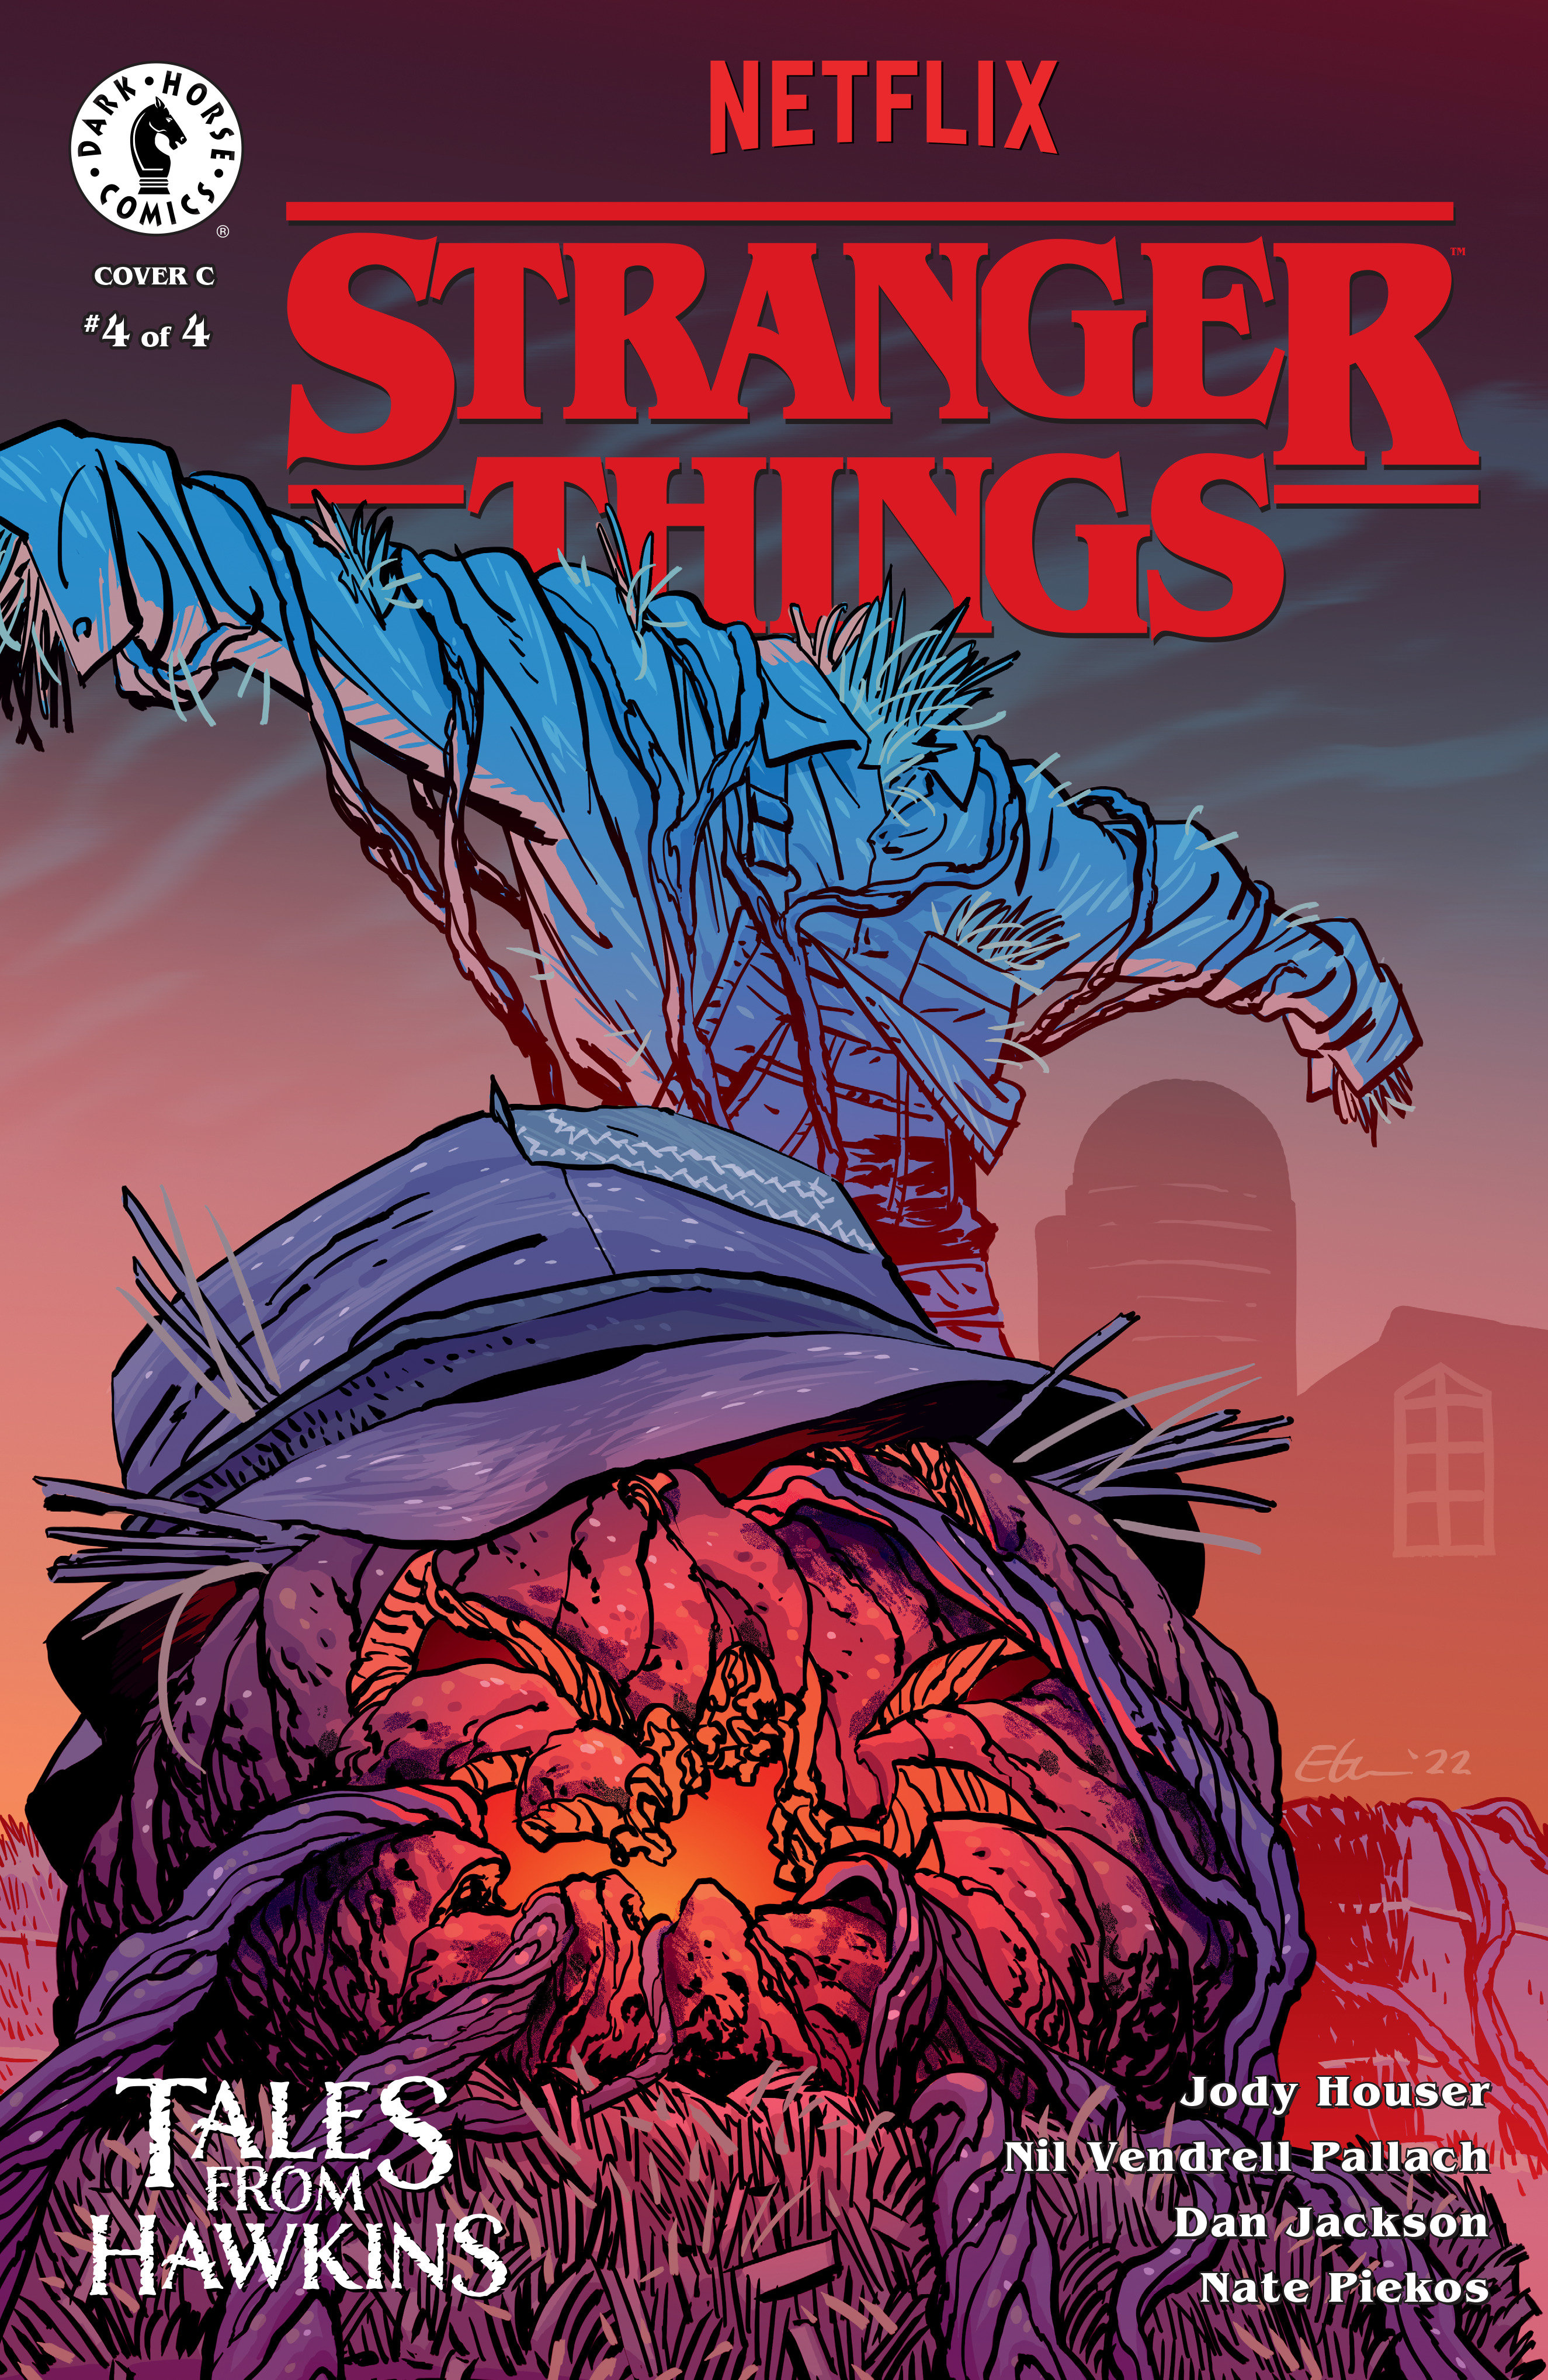 Stranger Things: Tales From Hawkins #4 Cover C (Ethan Young)